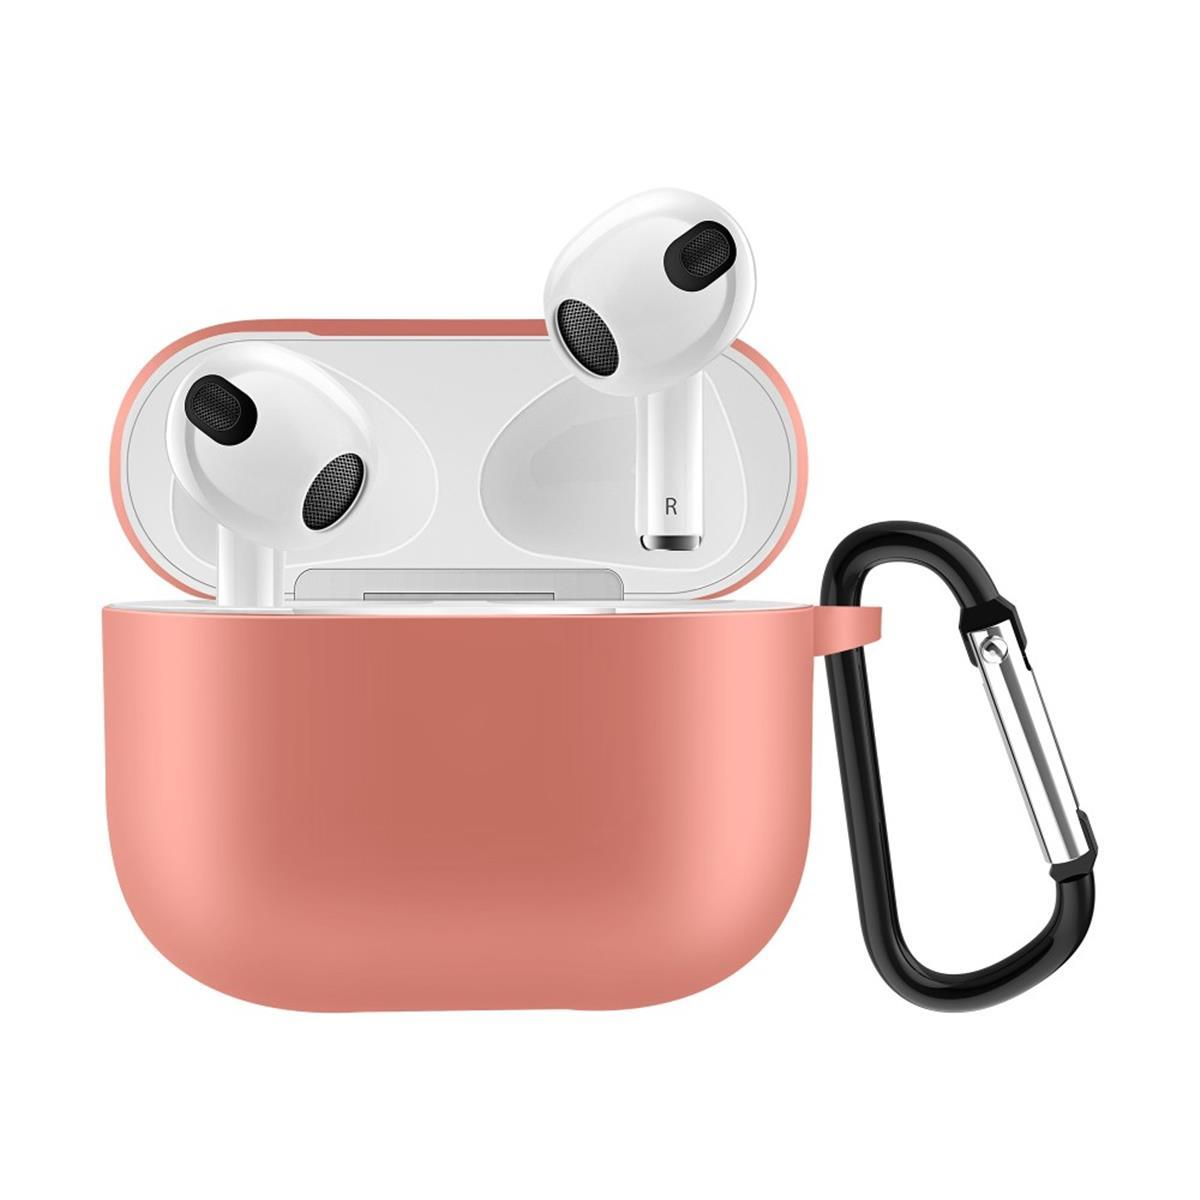 Ladecase Orange, AirPods Silikoncover Apple 76803 COVERKINGZ Unisex, für 3